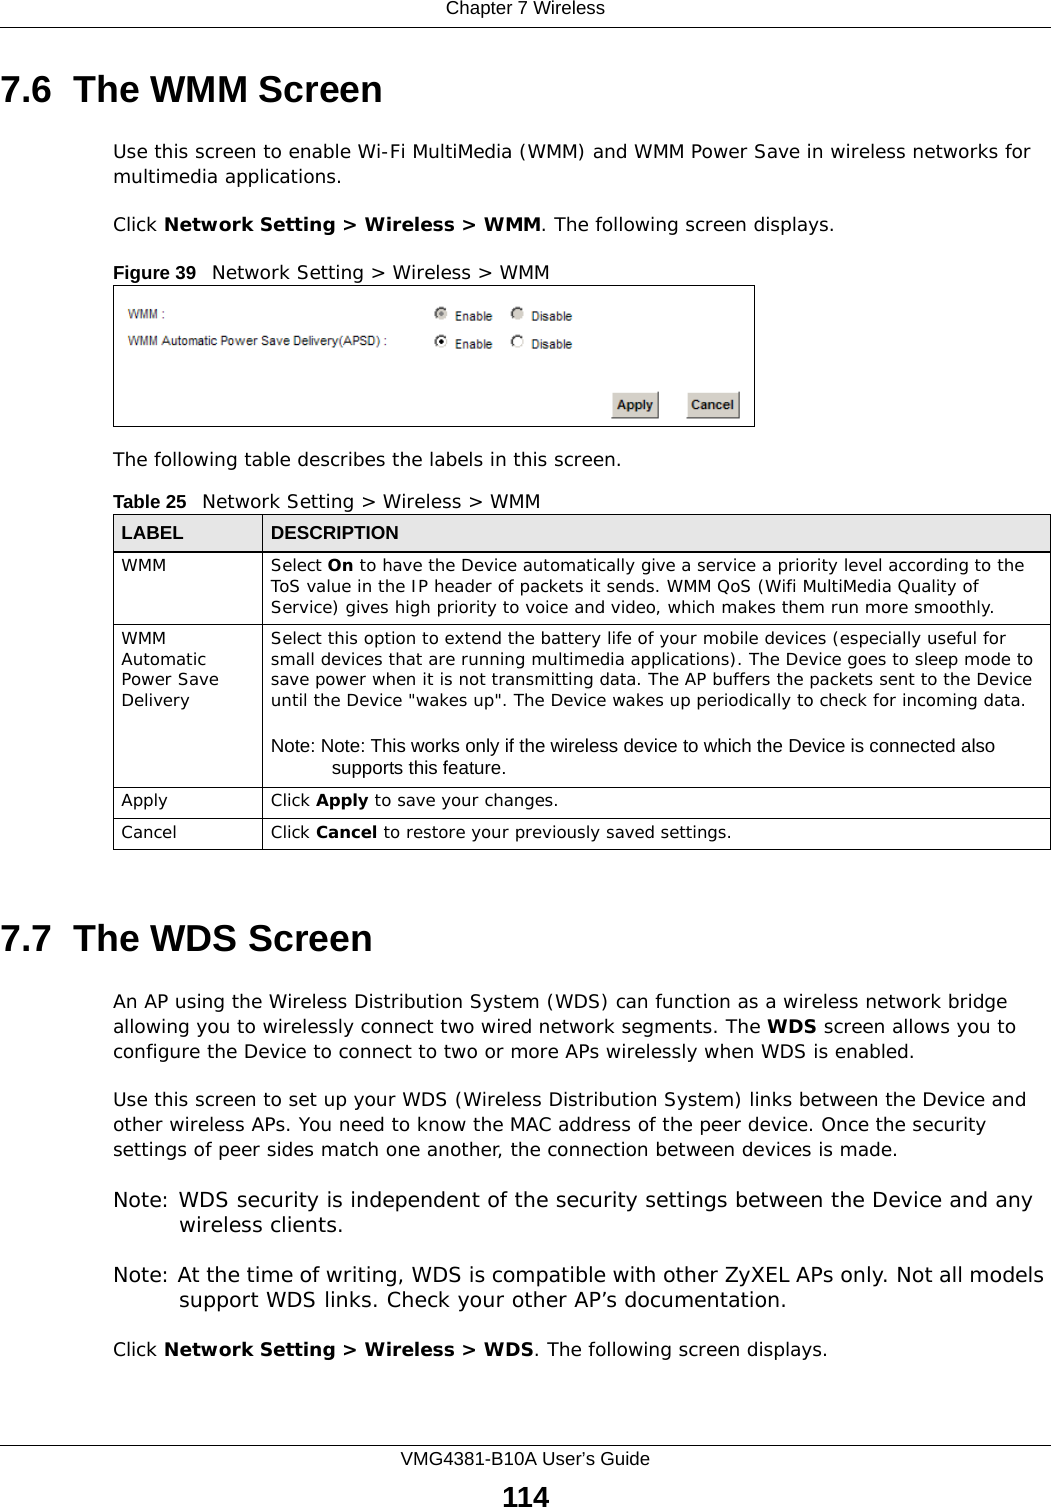 Chapter 7 WirelessVMG4381-B10A User’s Guide1147.6  The WMM ScreenUse this screen to enable Wi-Fi MultiMedia (WMM) and WMM Power Save in wireless networks for multimedia applications.Click Network Setting &gt; Wireless &gt; WMM. The following screen displays.Figure 39   Network Setting &gt; Wireless &gt; WMMThe following table describes the labels in this screen.7.7  The WDS ScreenAn AP using the Wireless Distribution System (WDS) can function as a wireless network bridge allowing you to wirelessly connect two wired network segments. The WDS screen allows you to configure the Device to connect to two or more APs wirelessly when WDS is enabled. Use this screen to set up your WDS (Wireless Distribution System) links between the Device and other wireless APs. You need to know the MAC address of the peer device. Once the security settings of peer sides match one another, the connection between devices is made. Note: WDS security is independent of the security settings between the Device and any wireless clients.Note: At the time of writing, WDS is compatible with other ZyXEL APs only. Not all models support WDS links. Check your other AP’s documentation.Click Network Setting &gt; Wireless &gt; WDS. The following screen displays.Table 25   Network Setting &gt; Wireless &gt; WMMLABEL DESCRIPTIONWMM Select On to have the Device automatically give a service a priority level according to the ToS value in the IP header of packets it sends. WMM QoS (Wifi MultiMedia Quality of Service) gives high priority to voice and video, which makes them run more smoothly.WMM Automatic Power Save DeliverySelect this option to extend the battery life of your mobile devices (especially useful for small devices that are running multimedia applications). The Device goes to sleep mode to save power when it is not transmitting data. The AP buffers the packets sent to the Device until the Device &quot;wakes up&quot;. The Device wakes up periodically to check for incoming data.Note: Note: This works only if the wireless device to which the Device is connected also supports this feature.Apply Click Apply to save your changes.Cancel Click Cancel to restore your previously saved settings.